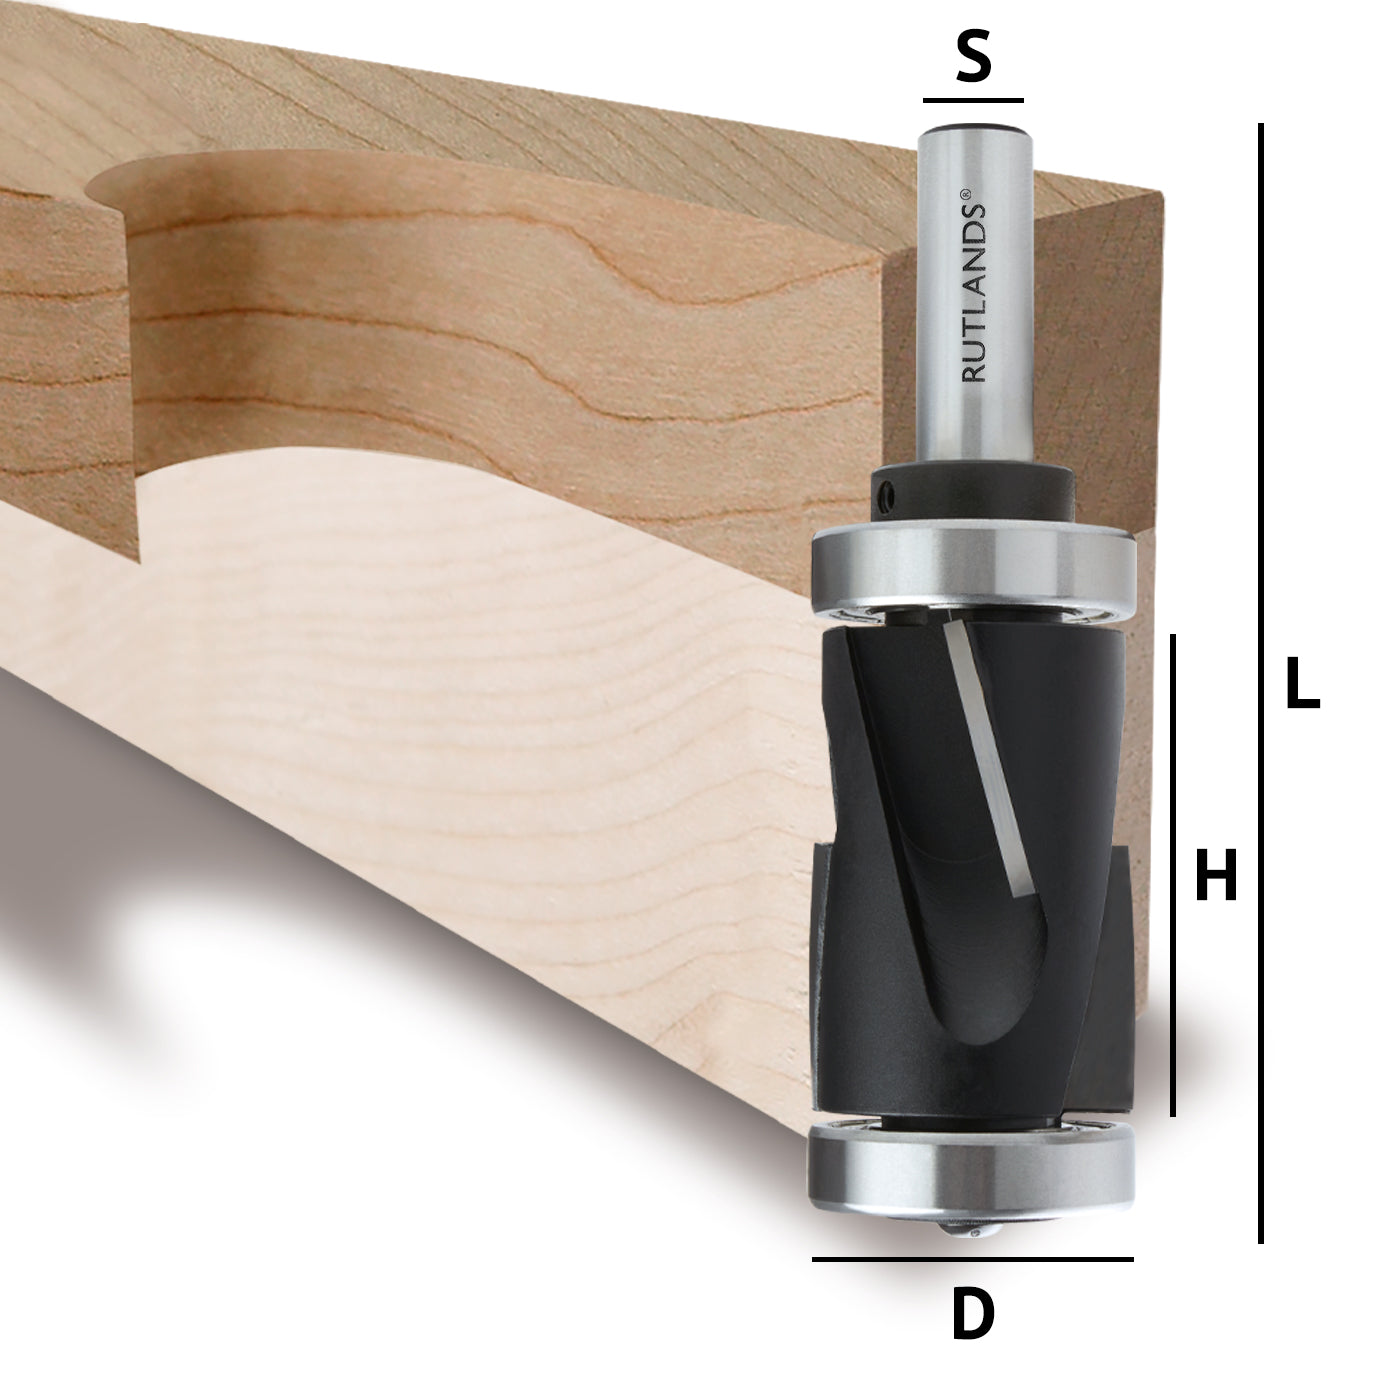 Router Bit Set - Flush Trim with Up and Down Shear